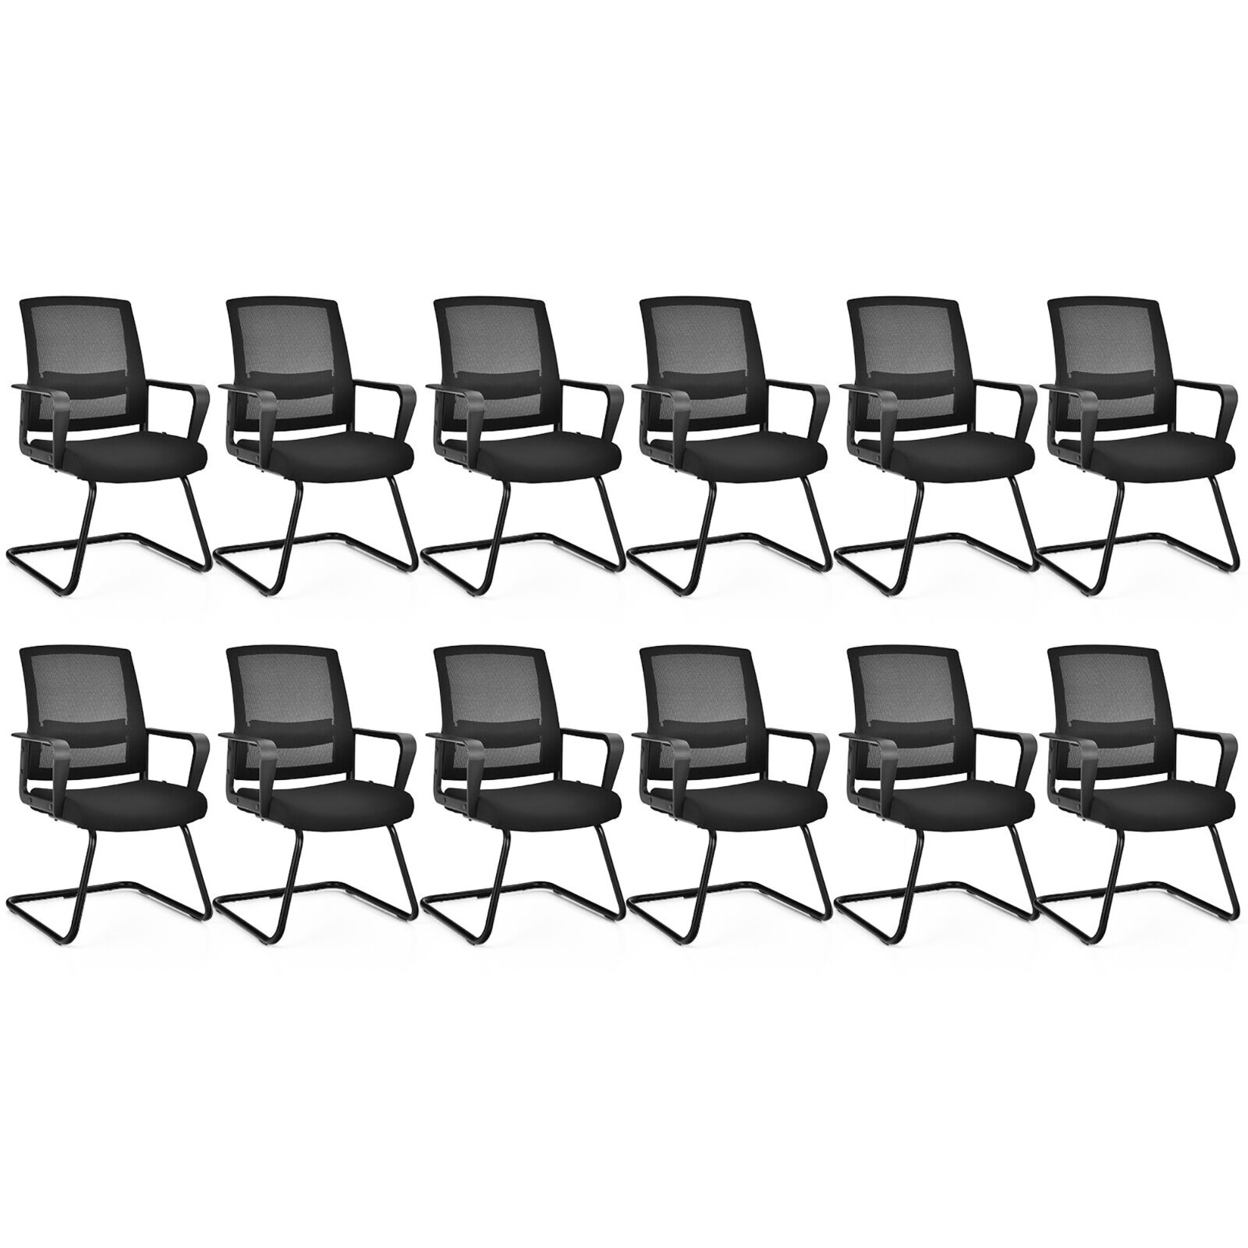 Set Of 12 Conference Chairs Mesh Reception Office Guest Chairs W/ Lumbar Support